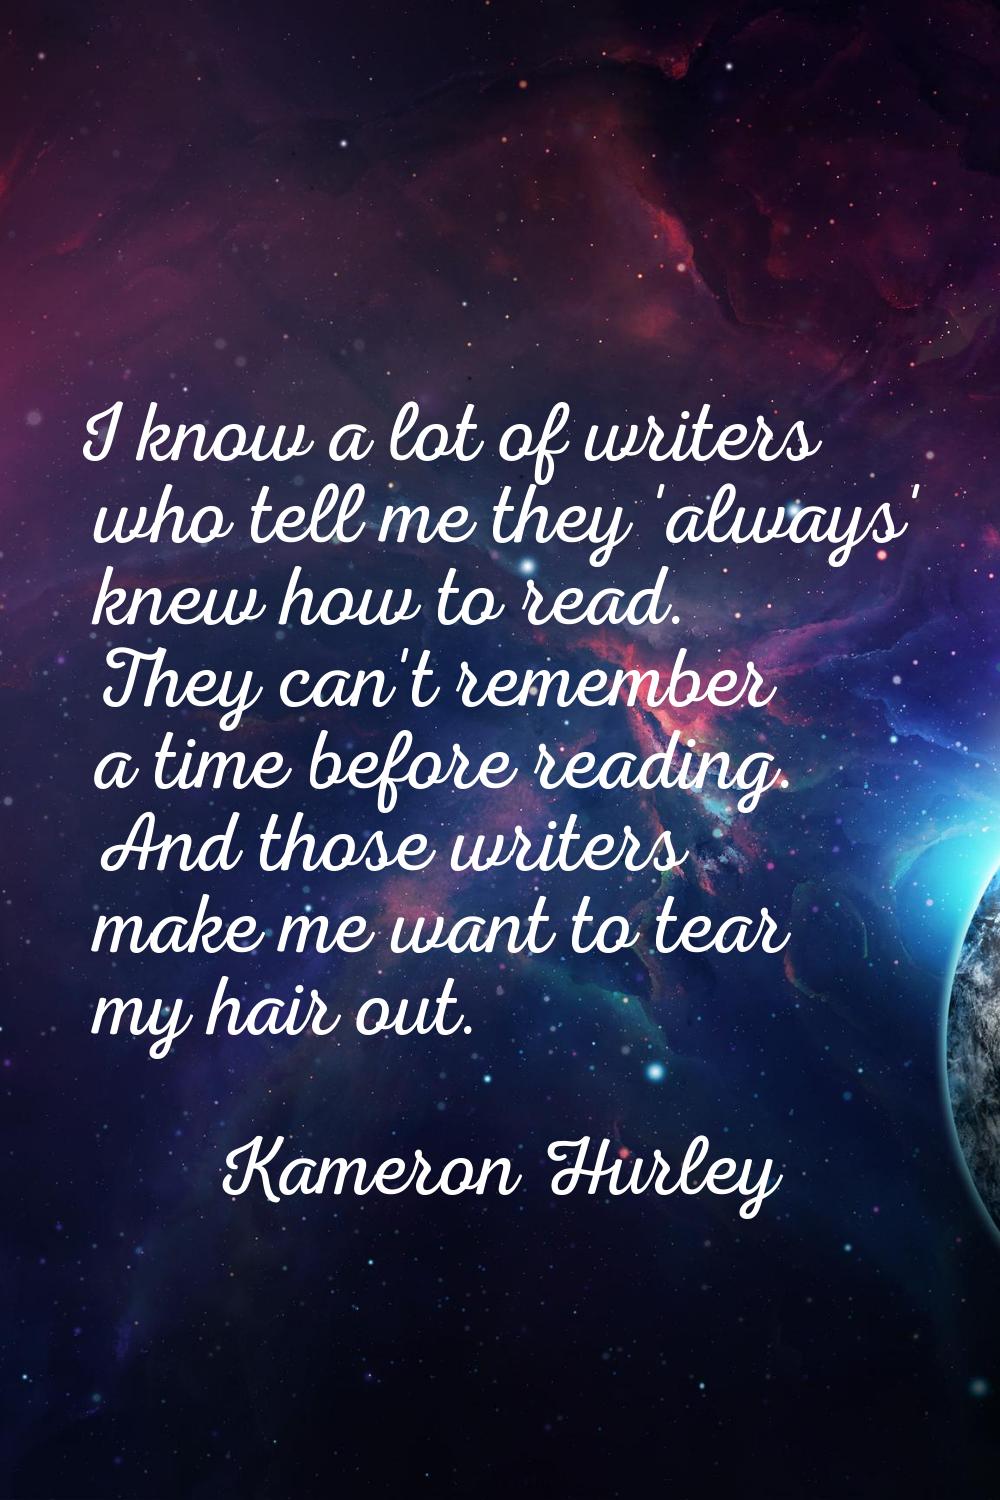 I know a lot of writers who tell me they 'always' knew how to read. They can't remember a time befo